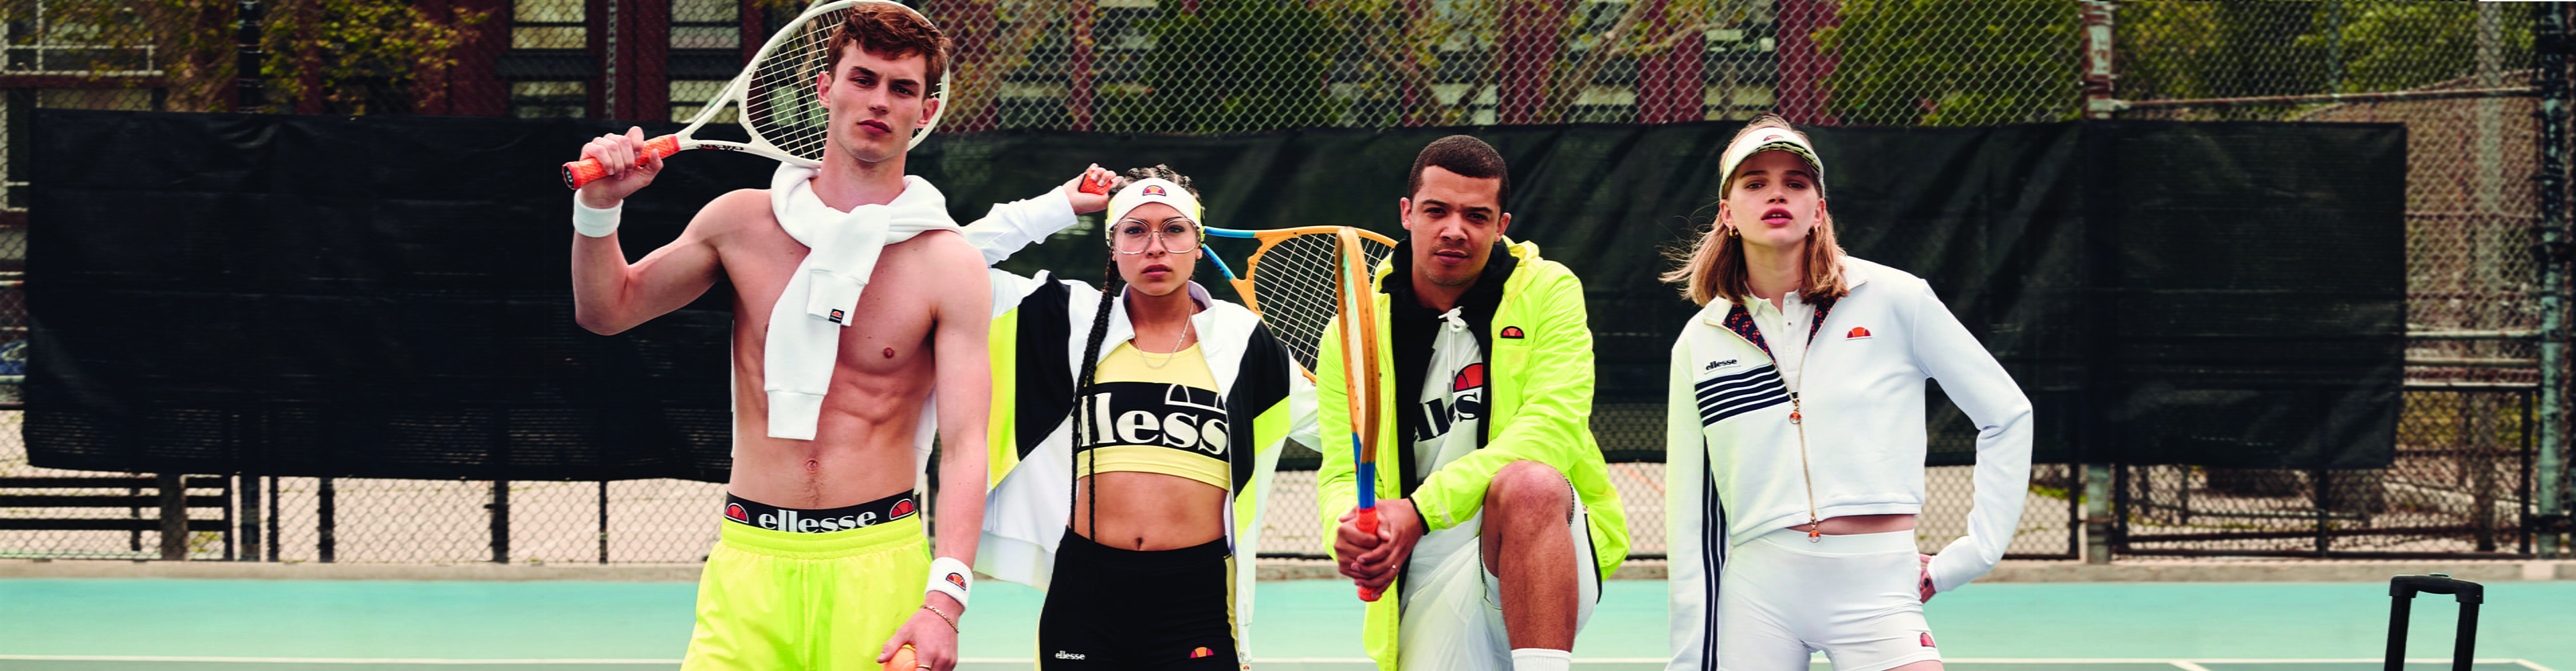 Ellesse, the clothing line for sporty men and women. ELLESSE all